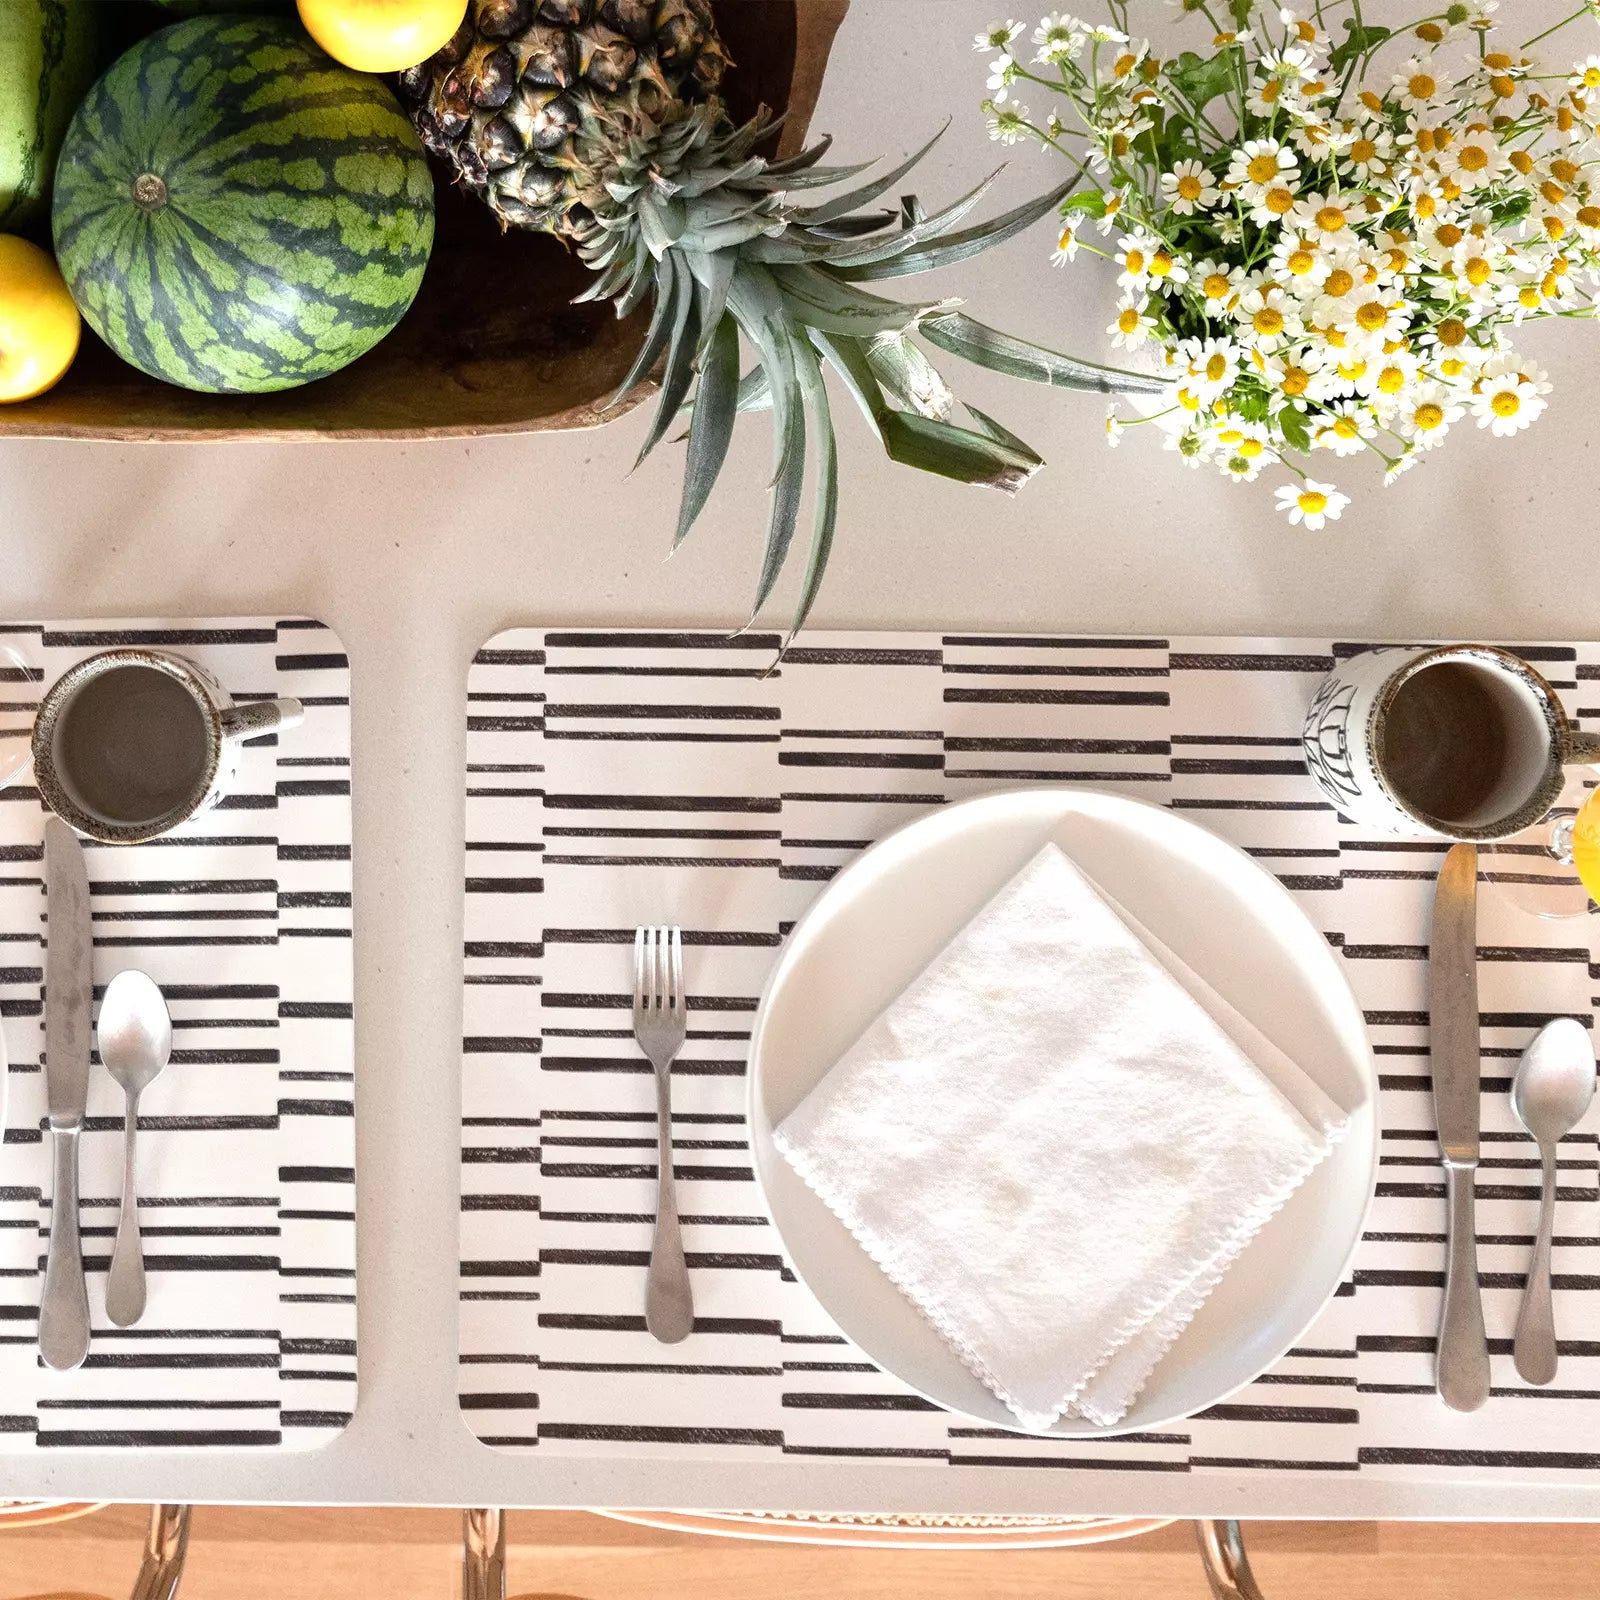 Nara Black and White Striped place mat at table setting with plate, napkin and silverware pictured from above